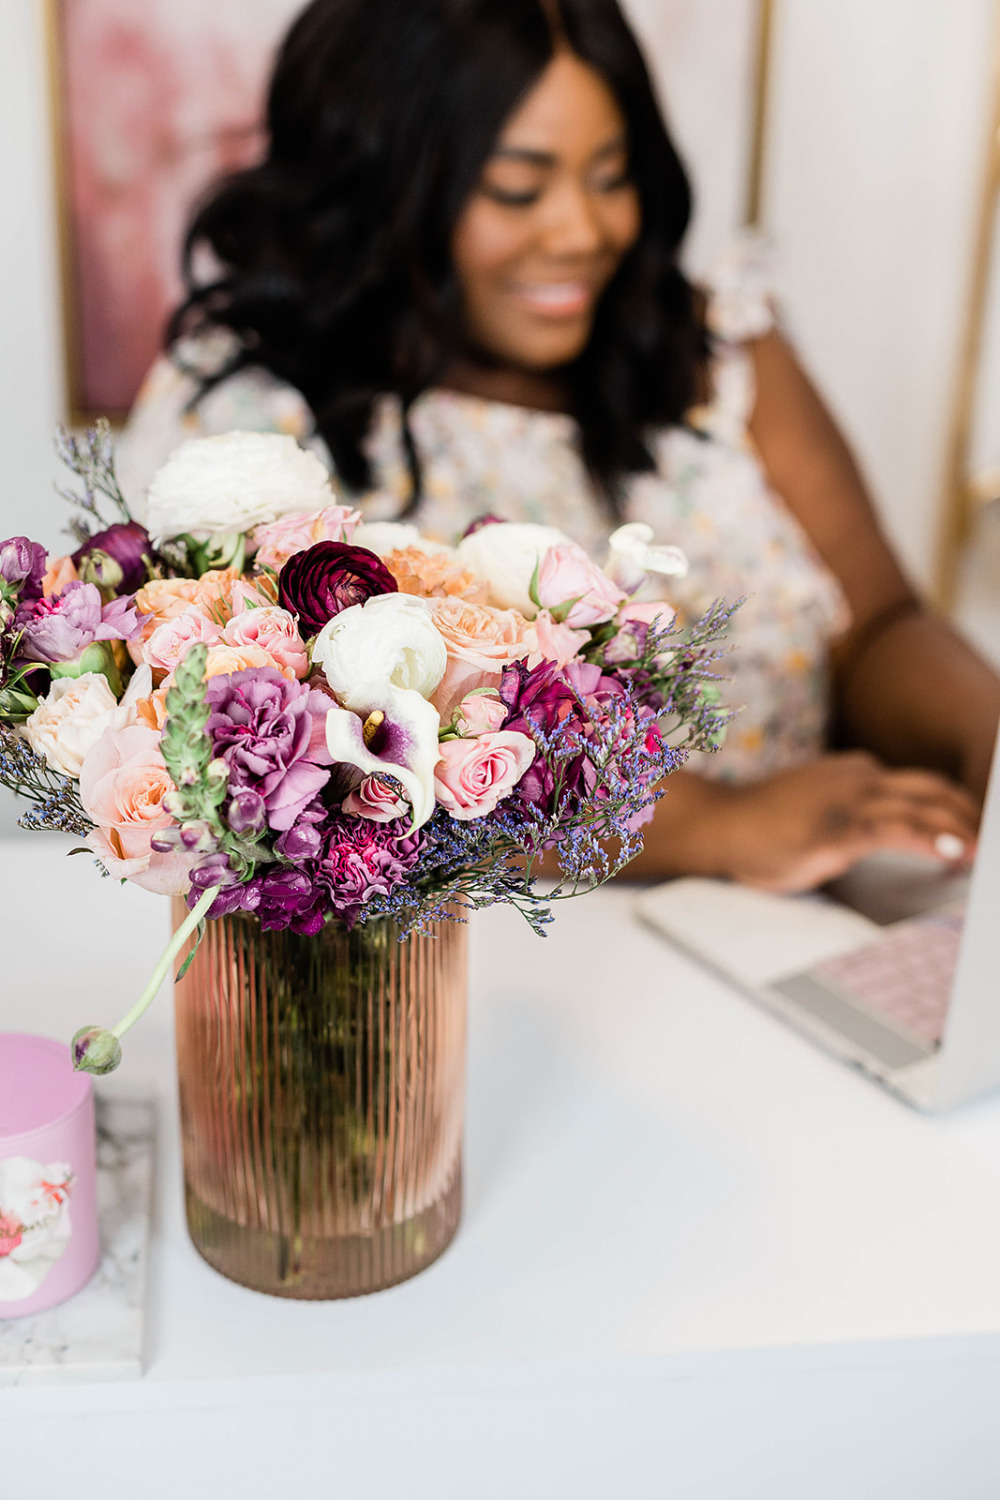 Urban Stems, Floral Arranging, Decorating Office, Flowers in vase, Girl working in office, Home Office Decor, LC Lauren Conrad